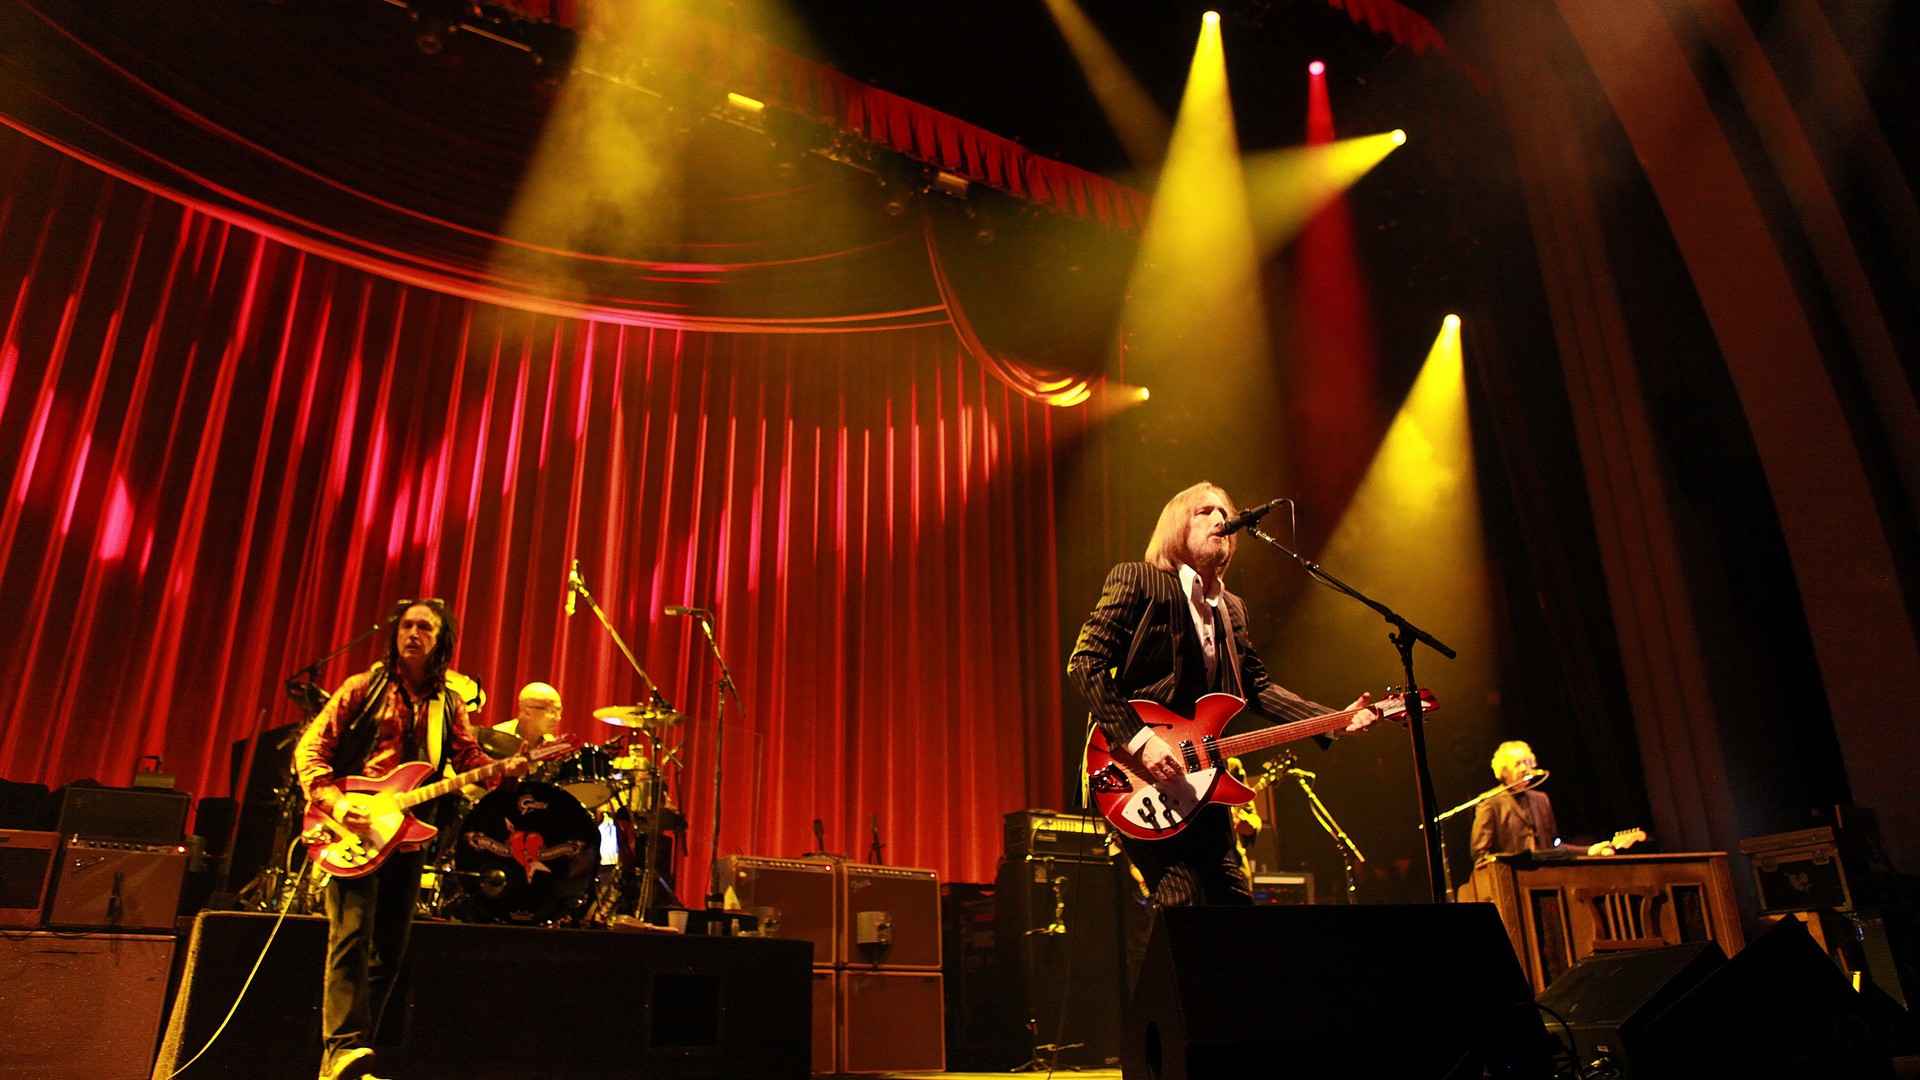 Classic Rock Rock Amp Roll Tom Petty Tom Petty And The Heartbreakers 1920x1080